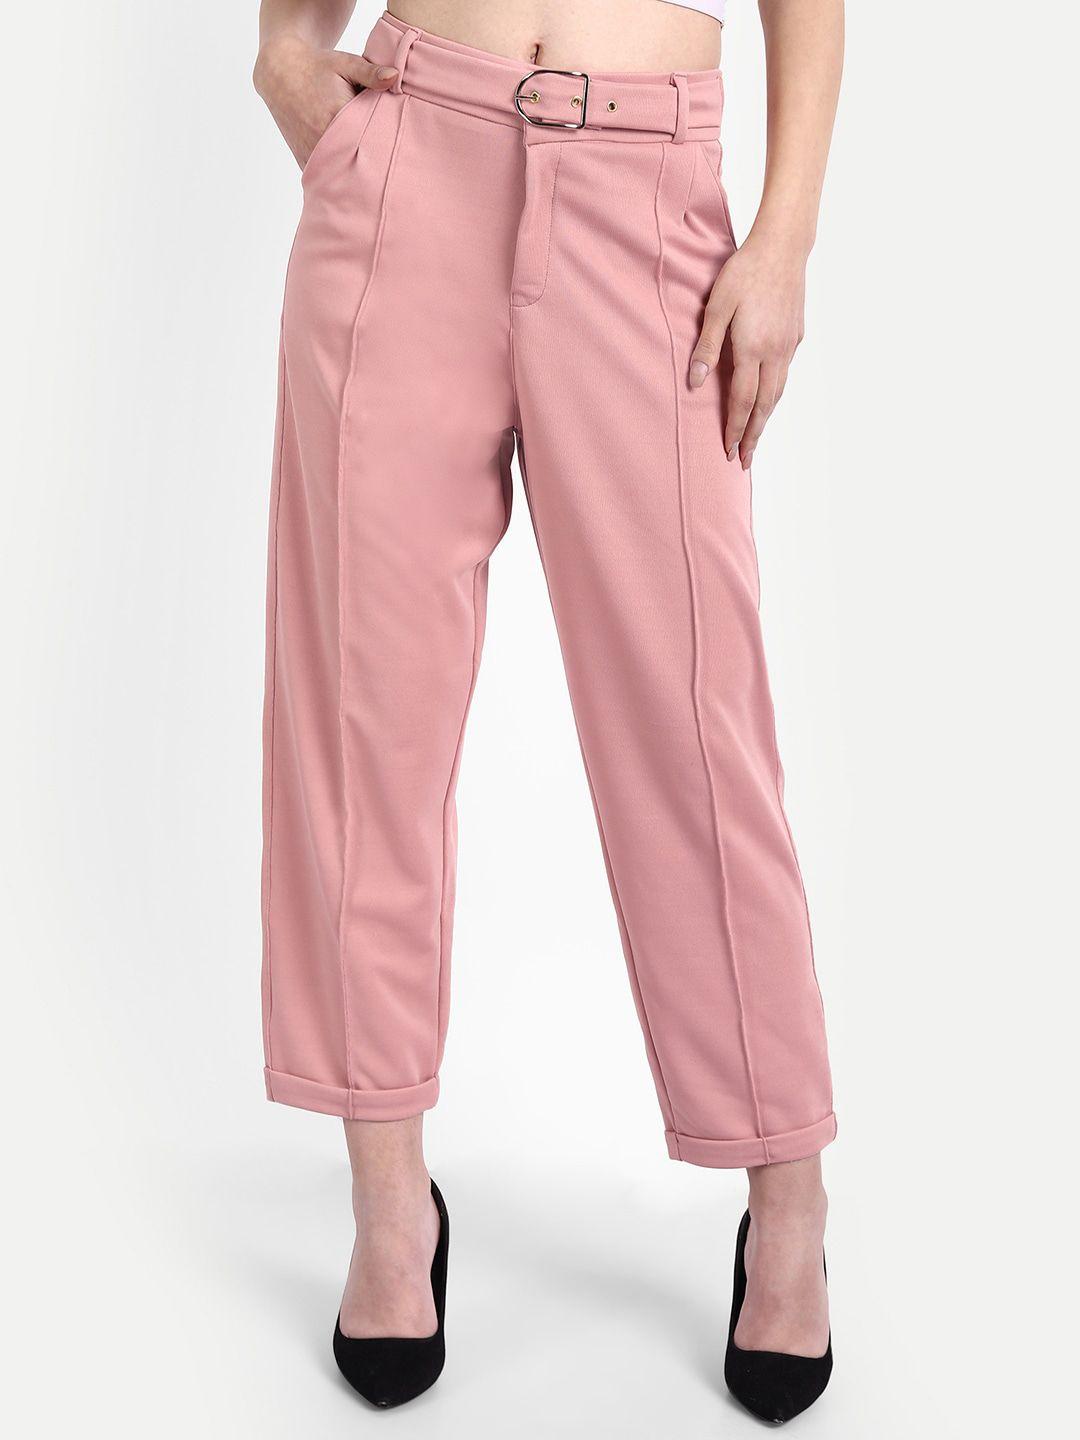 broadstar-women-smart-straight-fit-high-rise-stretchable-easy-wash-trousers